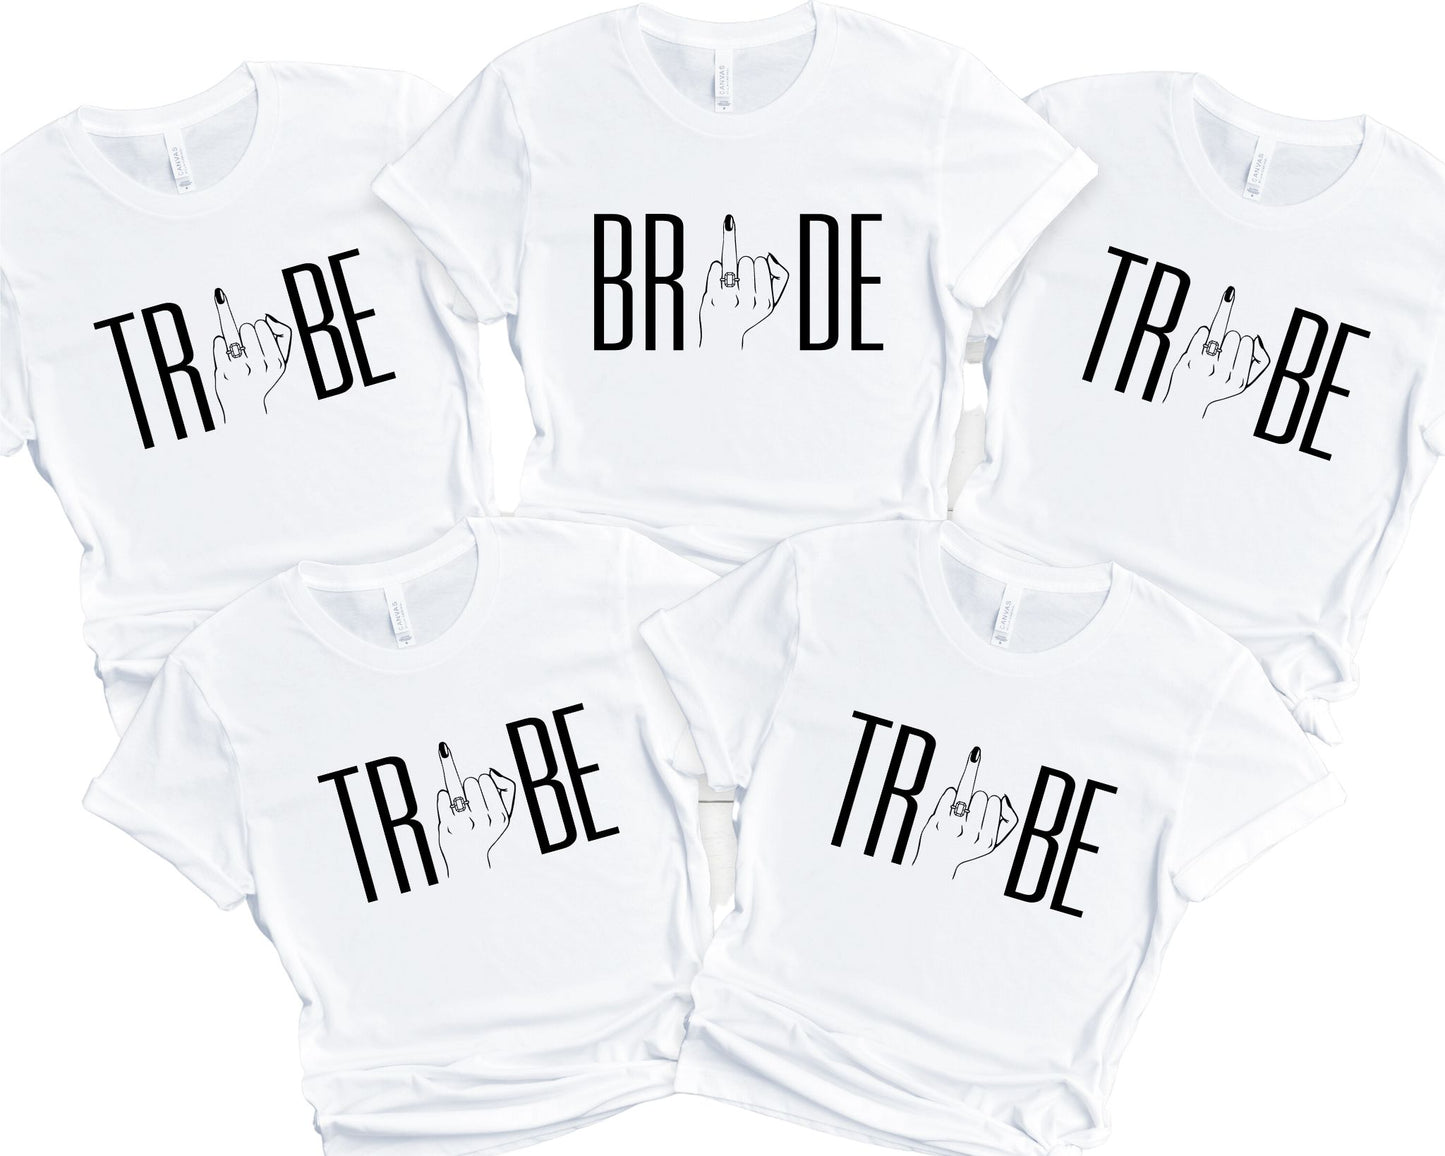 Bride / Tribe Bachelorette Party T-Shirts (Shirts are Sold Separately)